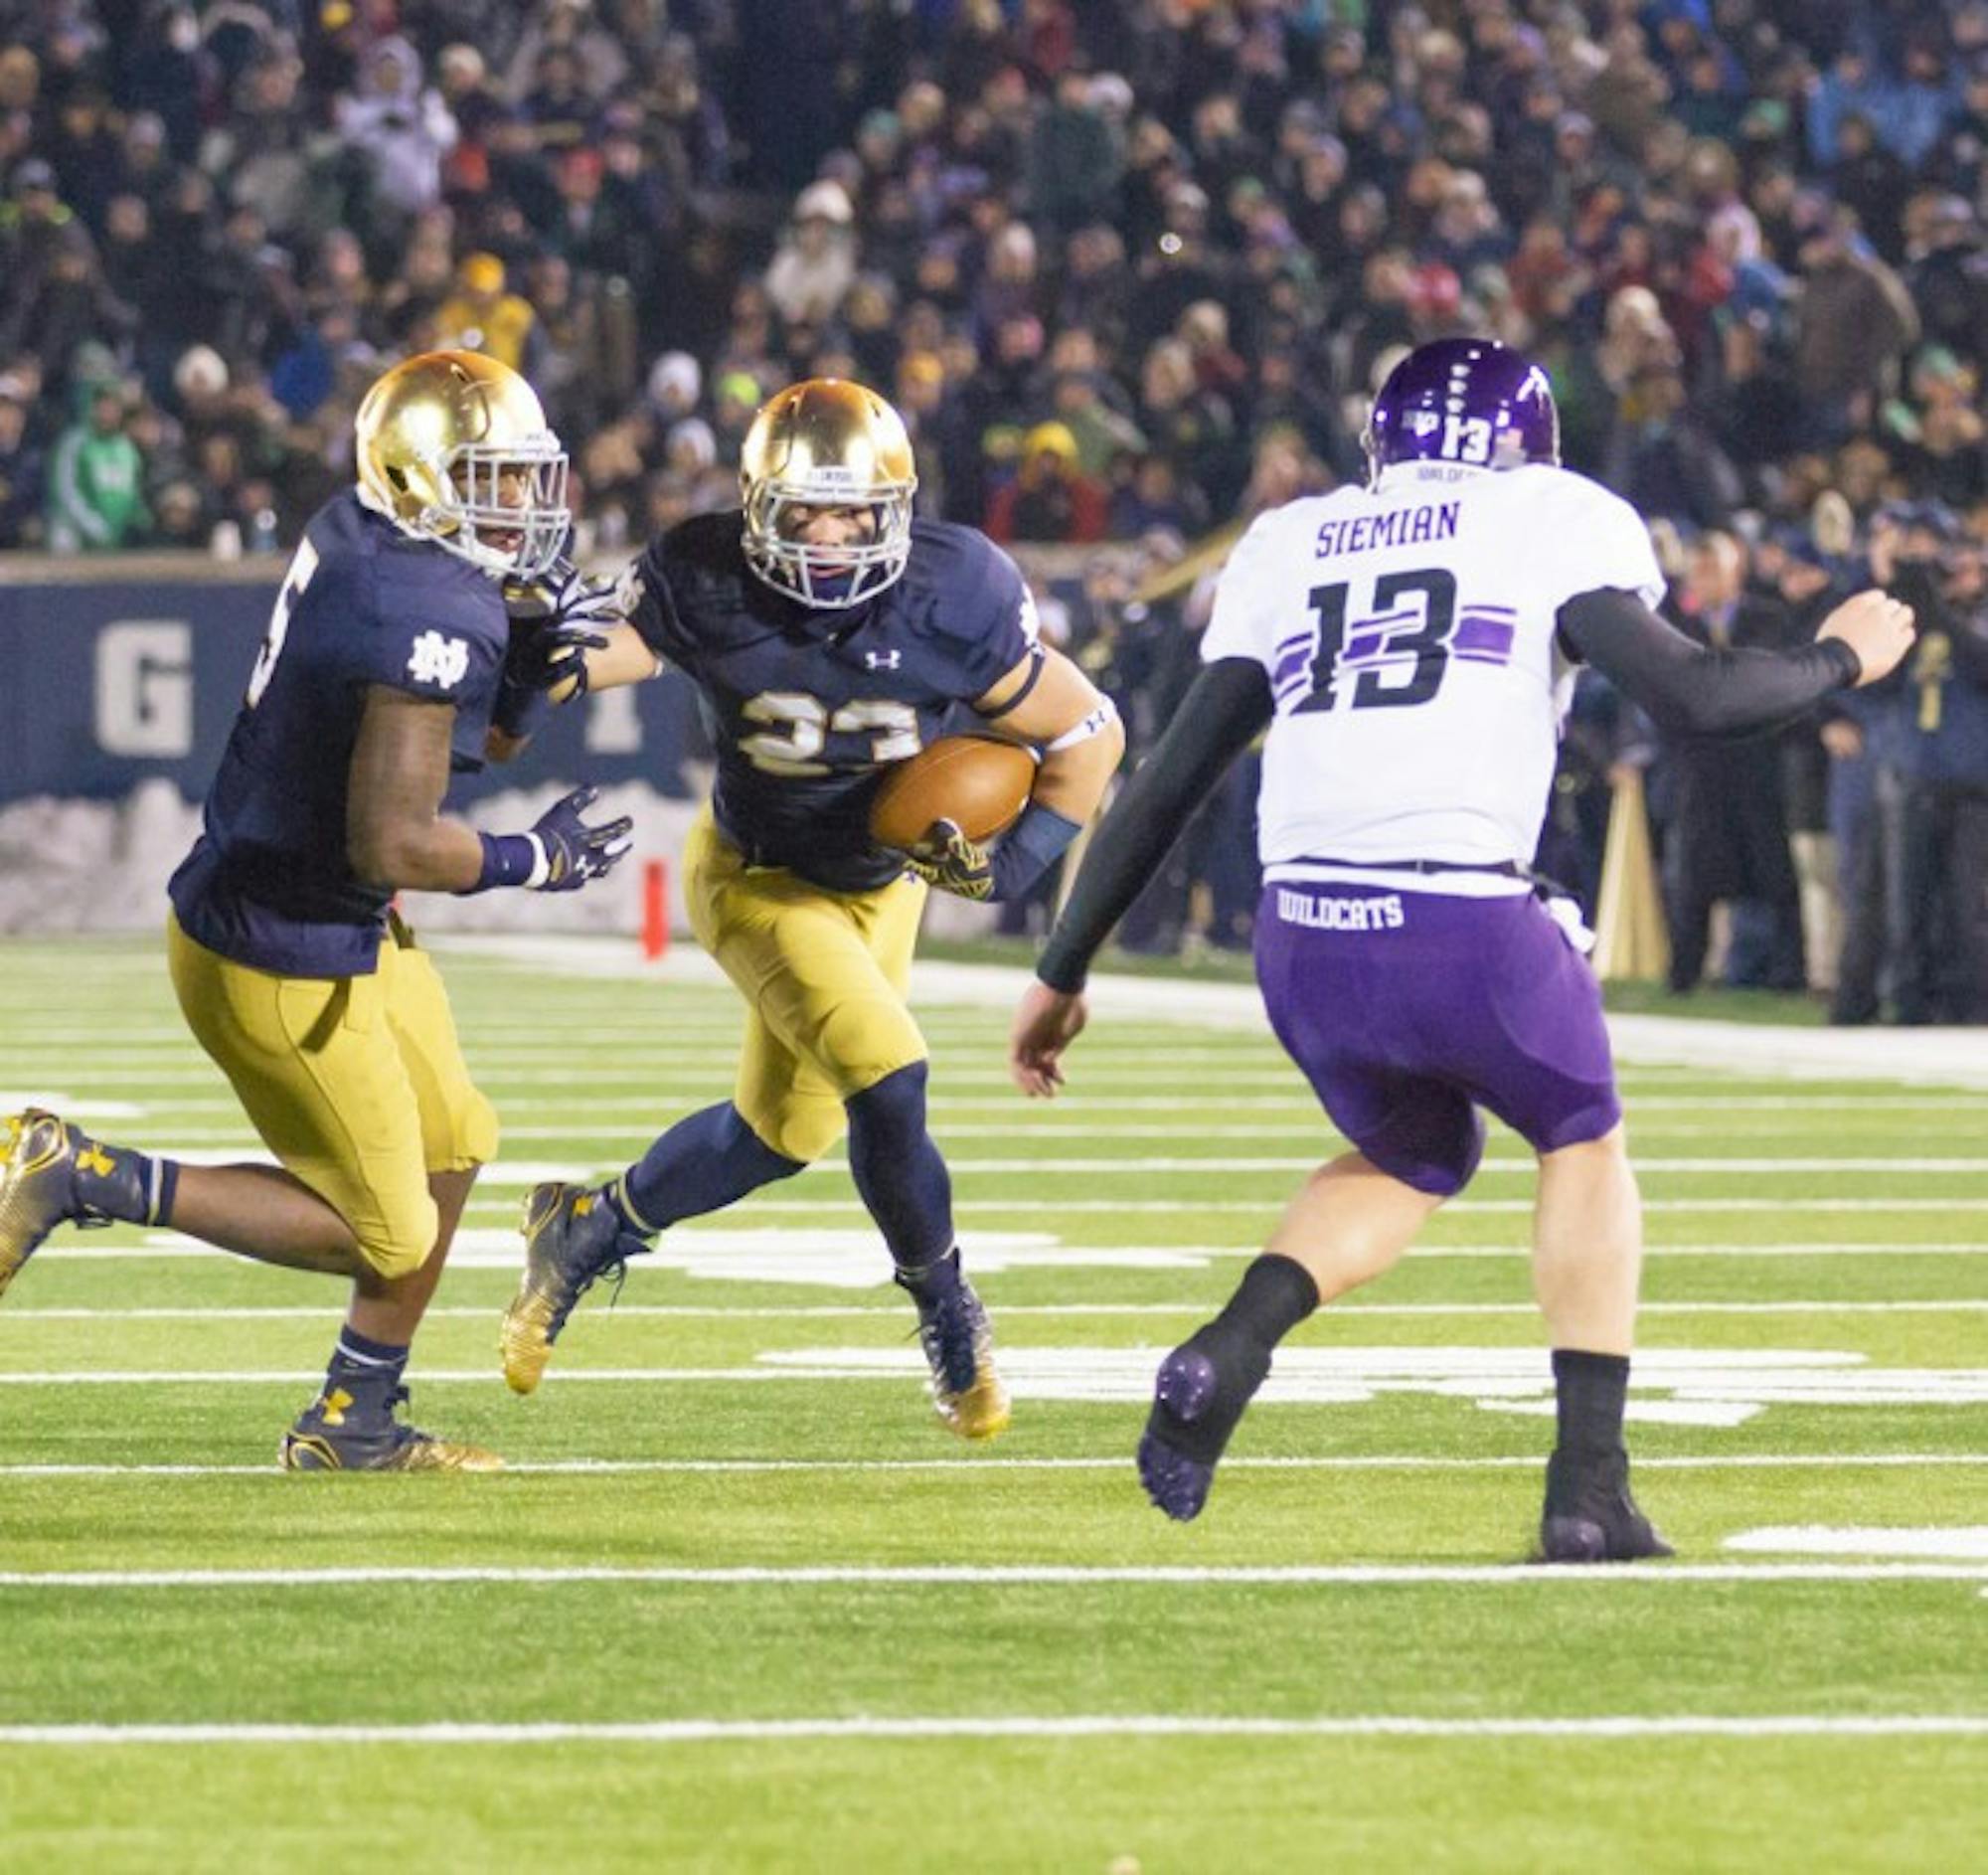 Irish freshman safety Drue Tranquill heads upfield after recovering a fumble Saturday against Northwestern at Notre Dame Stadium.